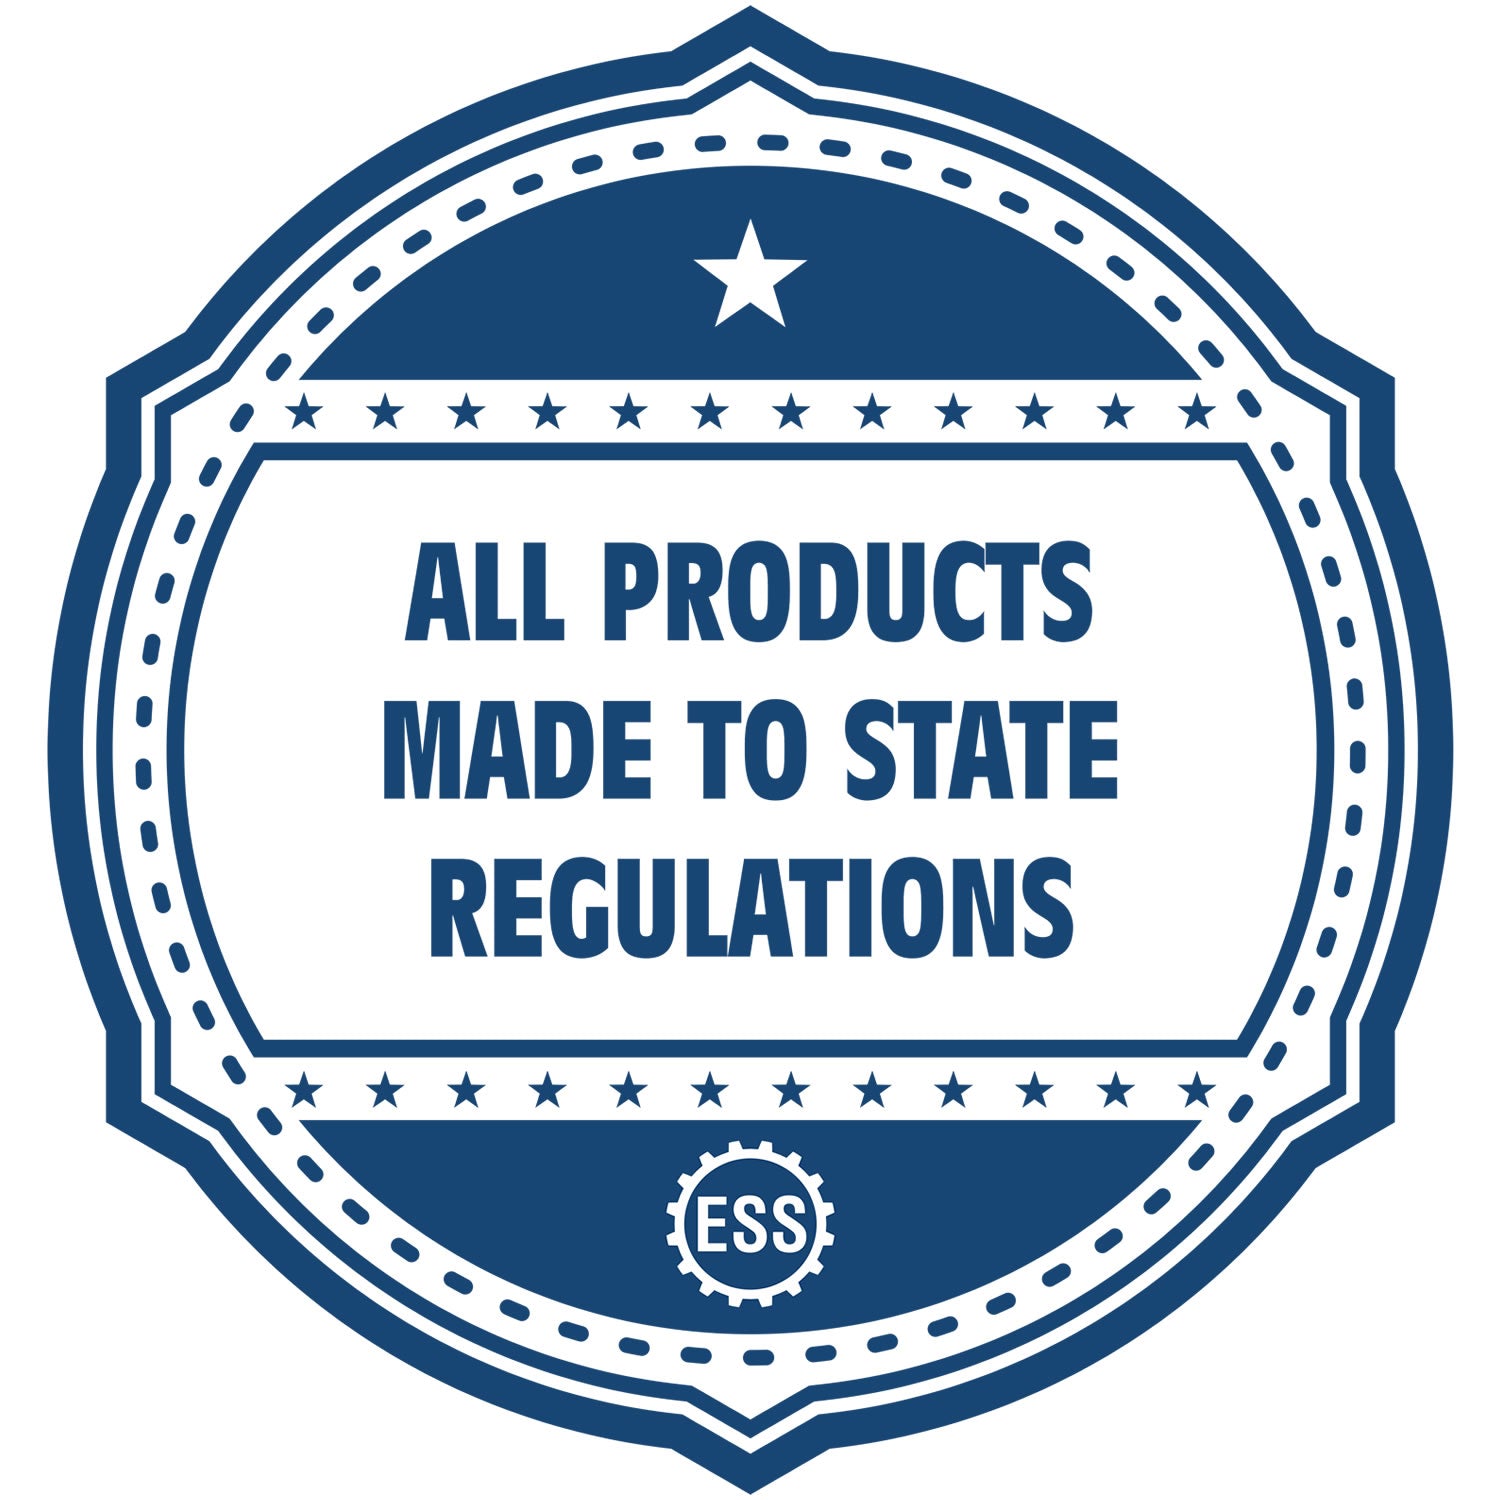 An icon or badge element for the Heavy Duty Cast Iron Wisconsin Engineer Seal Embosser showing that this product is made in compliance with state regulations.